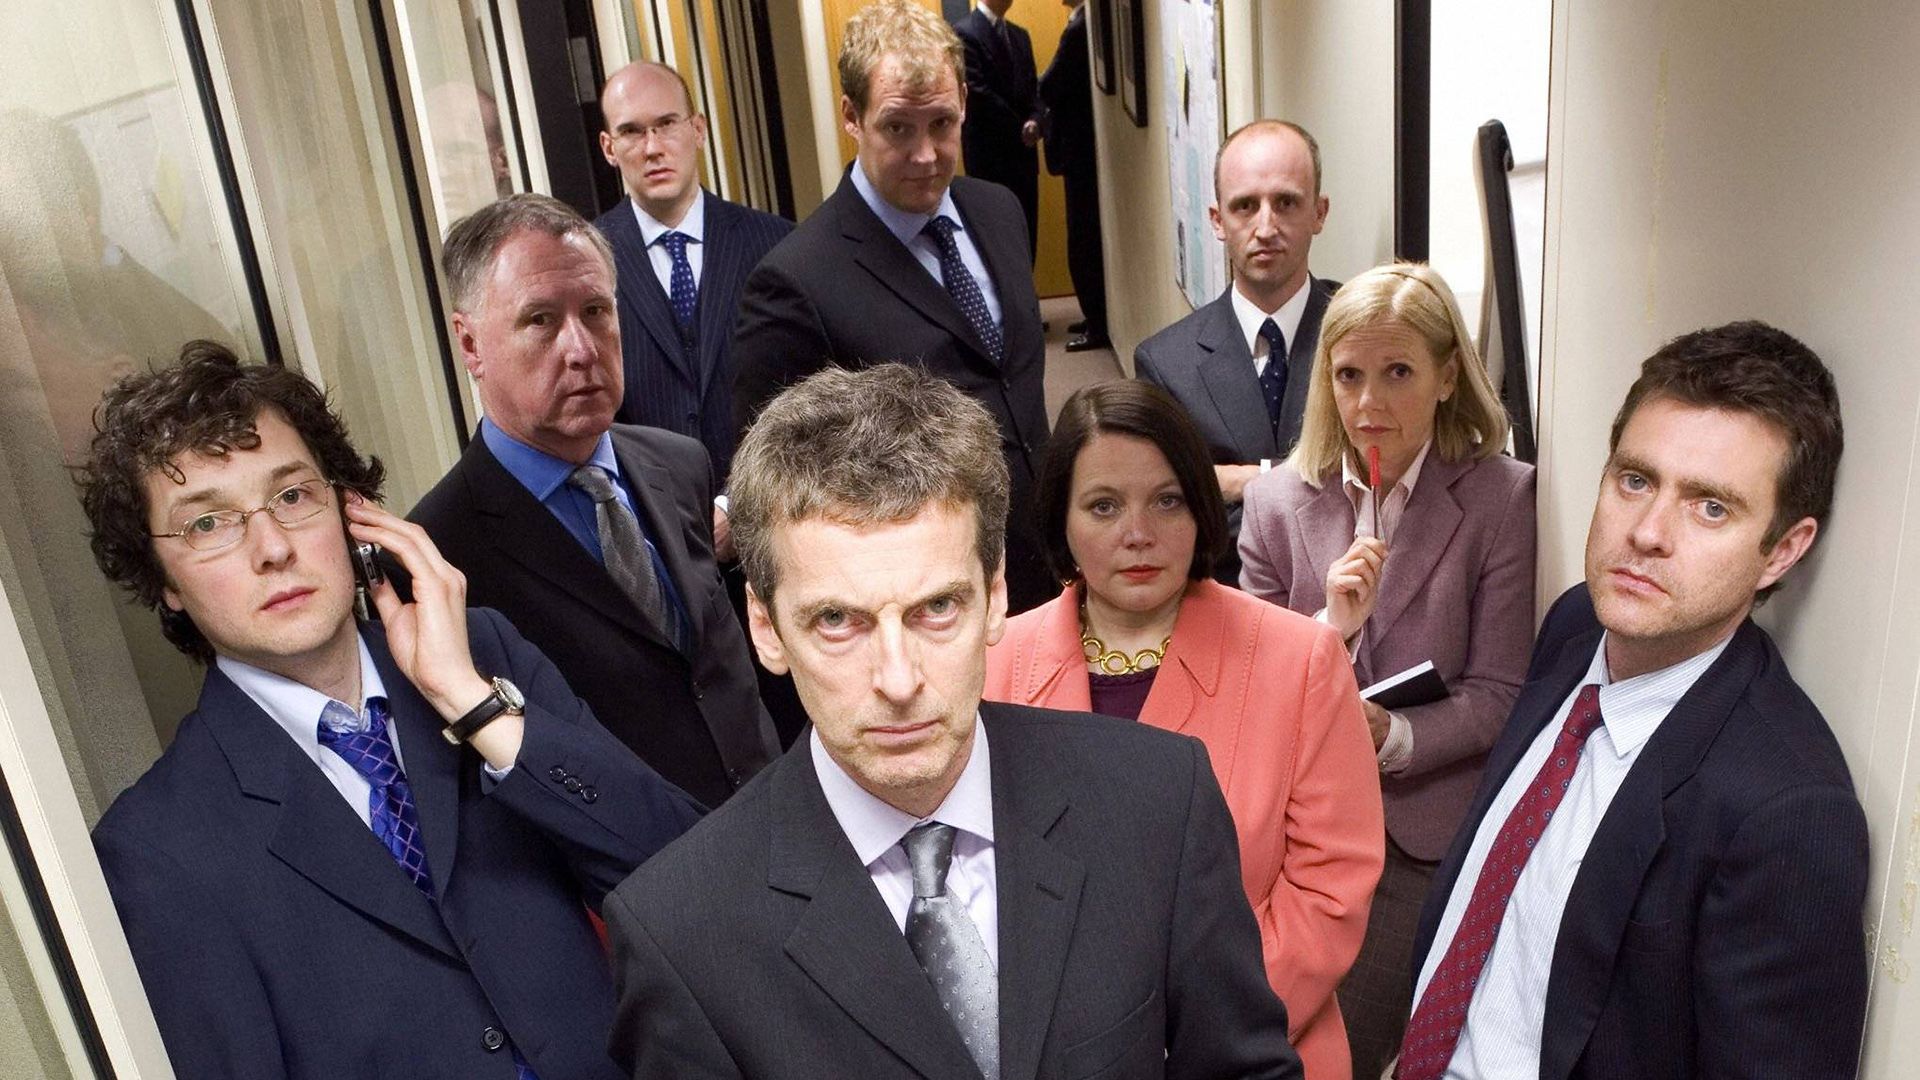 The Thick of It background